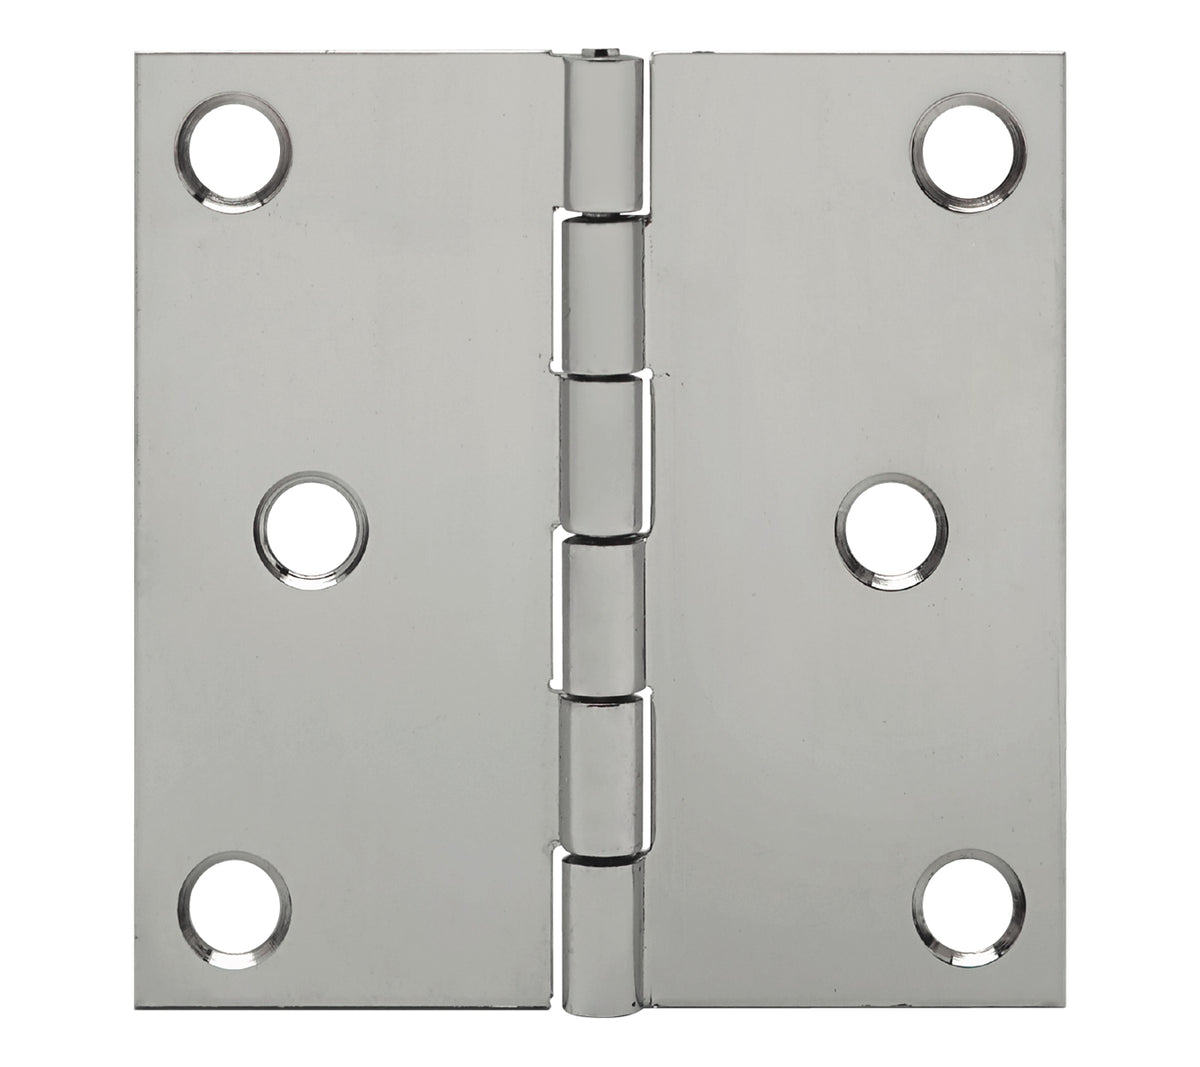 RSS-060400-100 HC Stainless Steel Rounded Strap Butt Hinges – JMC Jefco  Manufacturing, Inc.